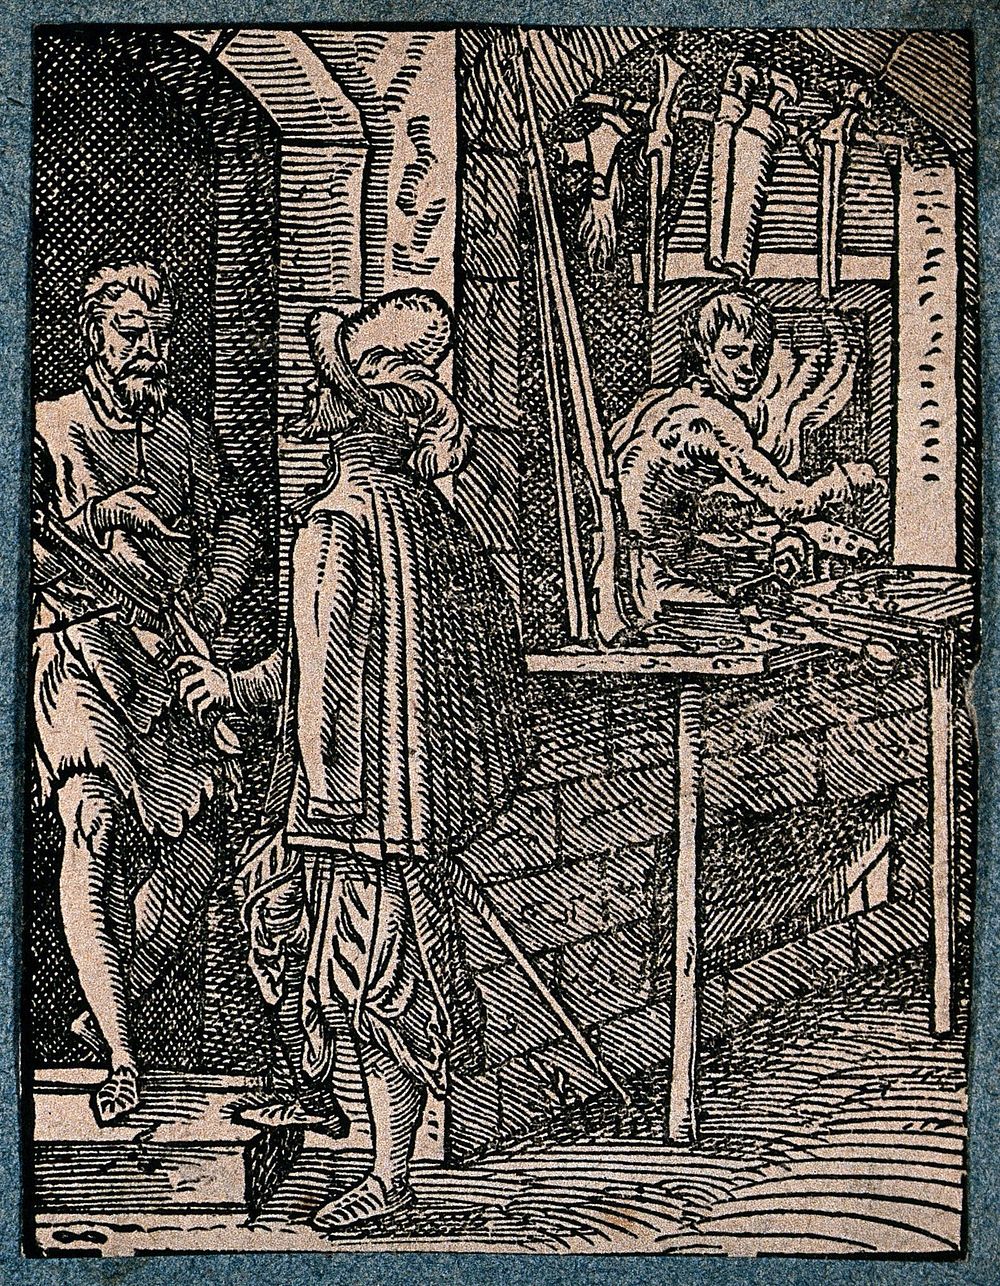 A gunsmith's shop: a customer talks to the gunsmith, while an assistant works metal in a furnace. Woodcut by J. Amman.